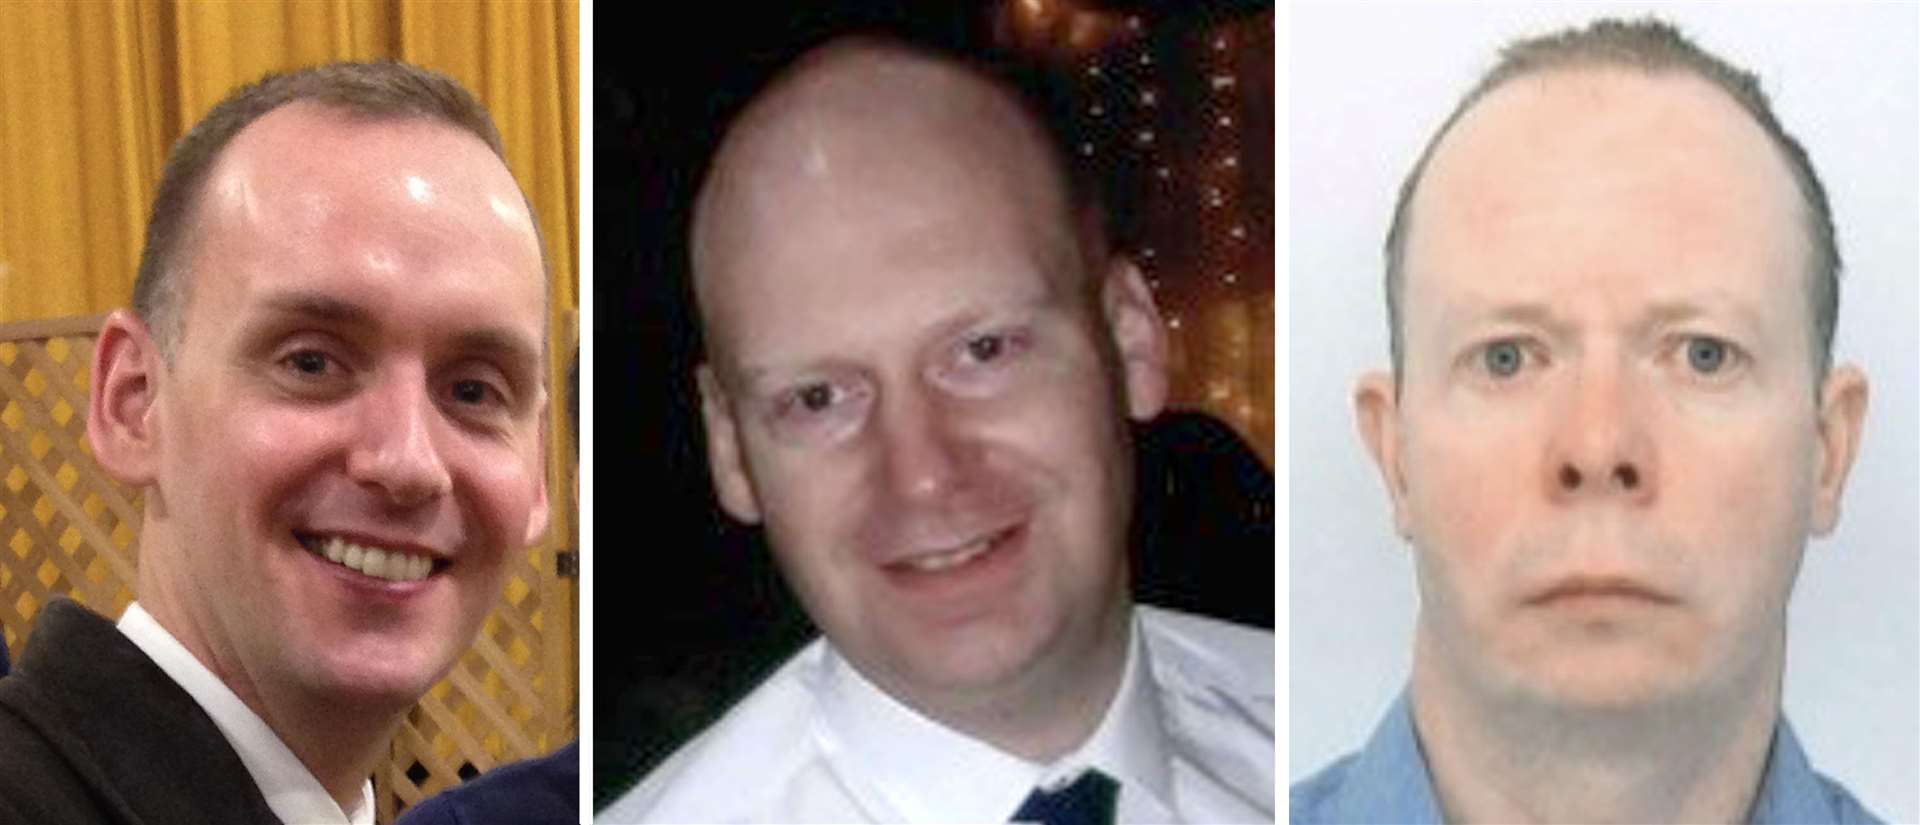 Family handout photos issued by Thames Valley Police of (left to right) Joe Ritchie-Bennett, James Furlong and David Wails, the three victims of the Reading attack (Family Handout/PA)